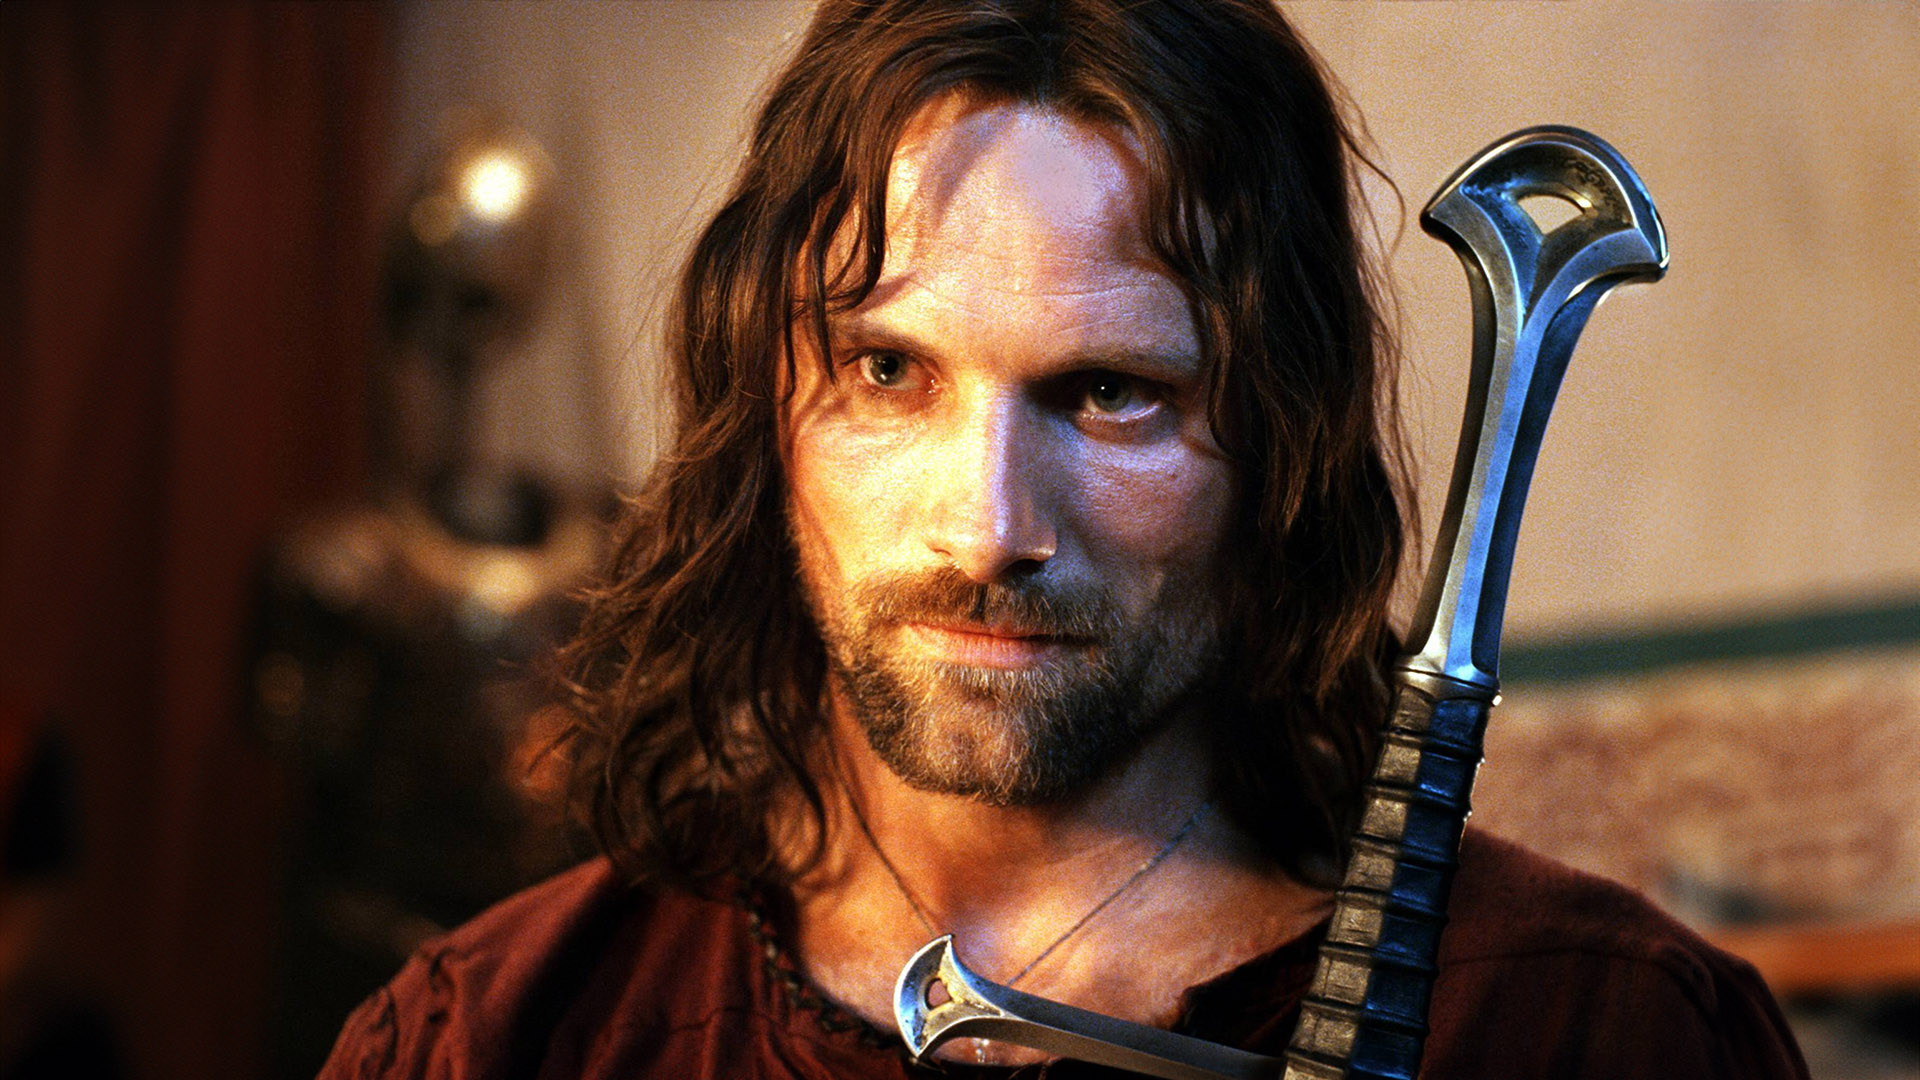 Lord of the Rings Earned $3 Billion, But How Much Did LotR Cast Make?